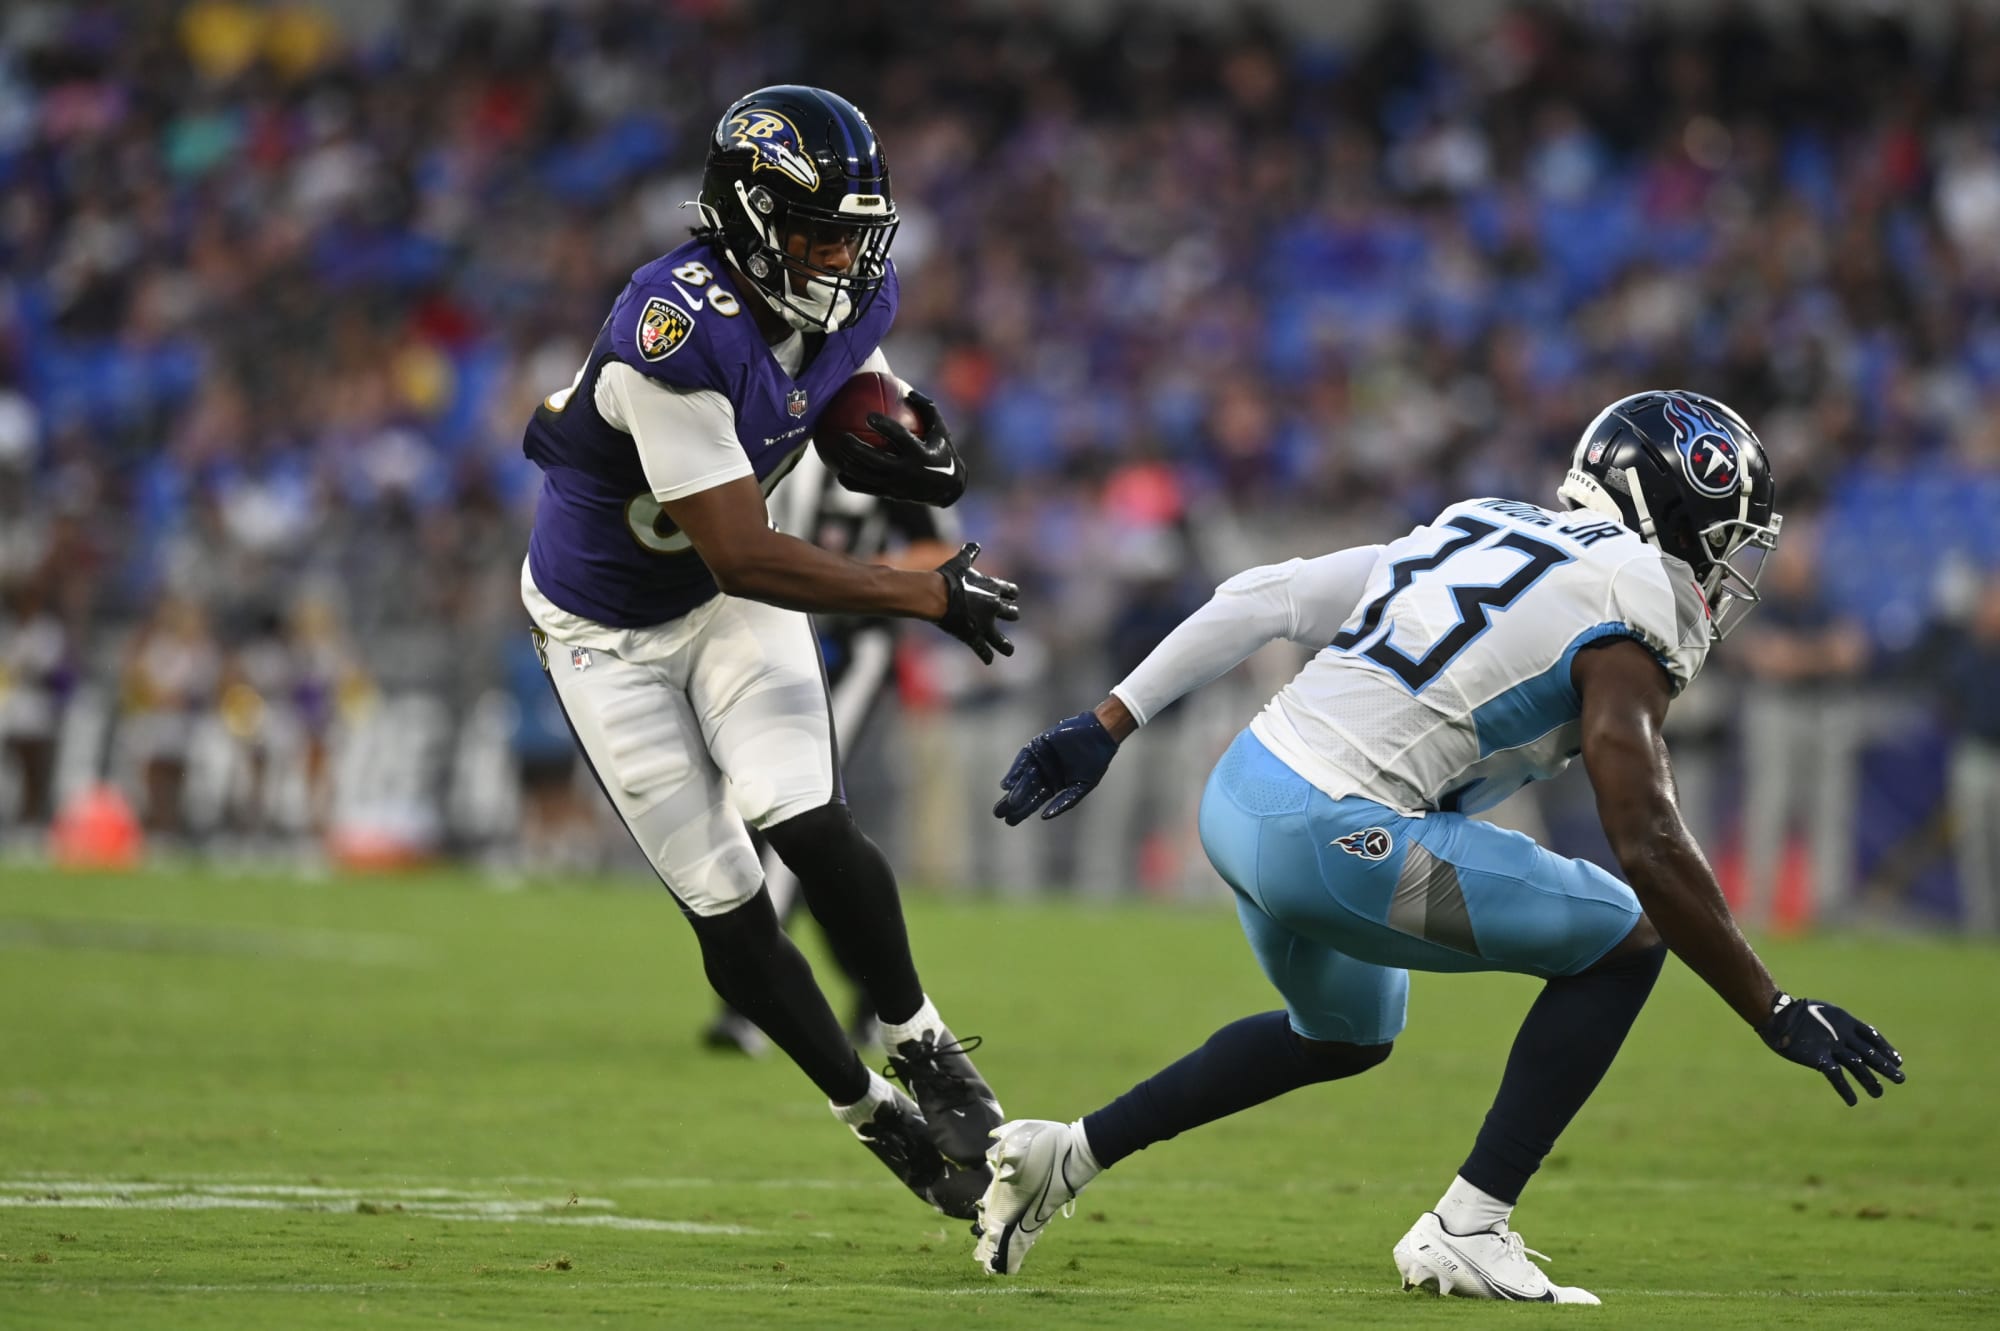 Isaiah Likely was the star of the Ravens’ first preseason game